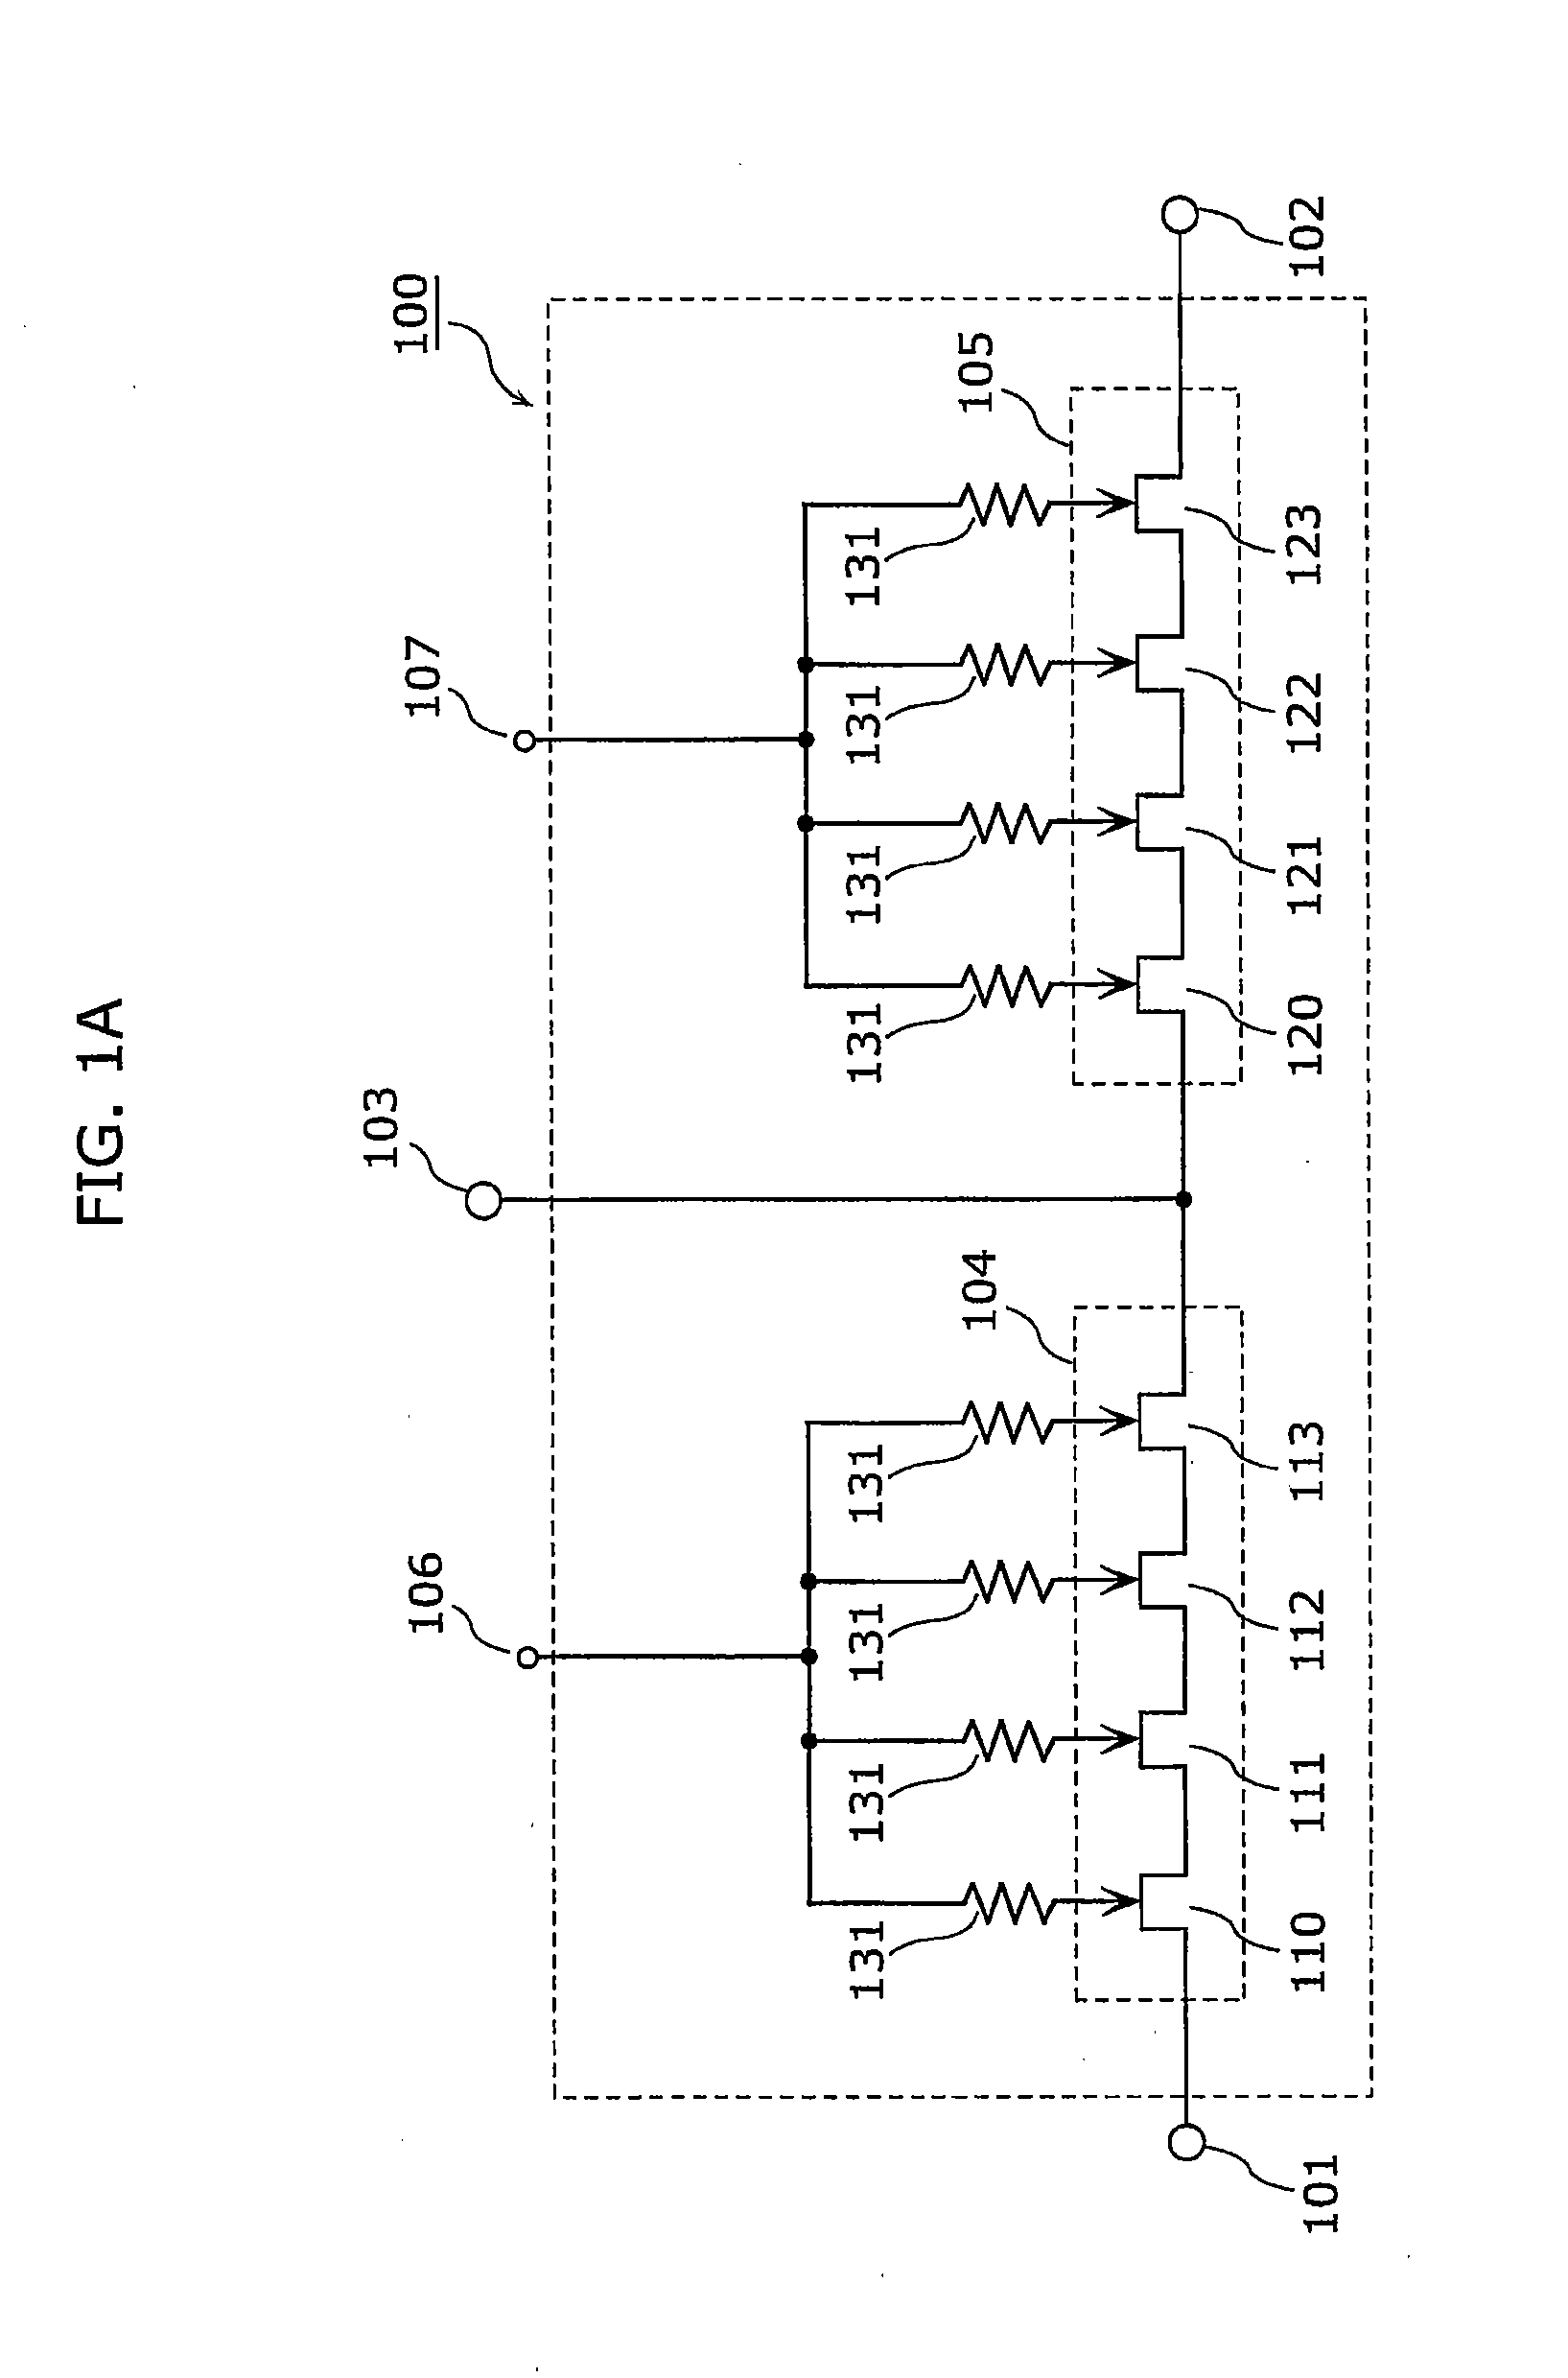 Radio frequency switch and radio frequency module